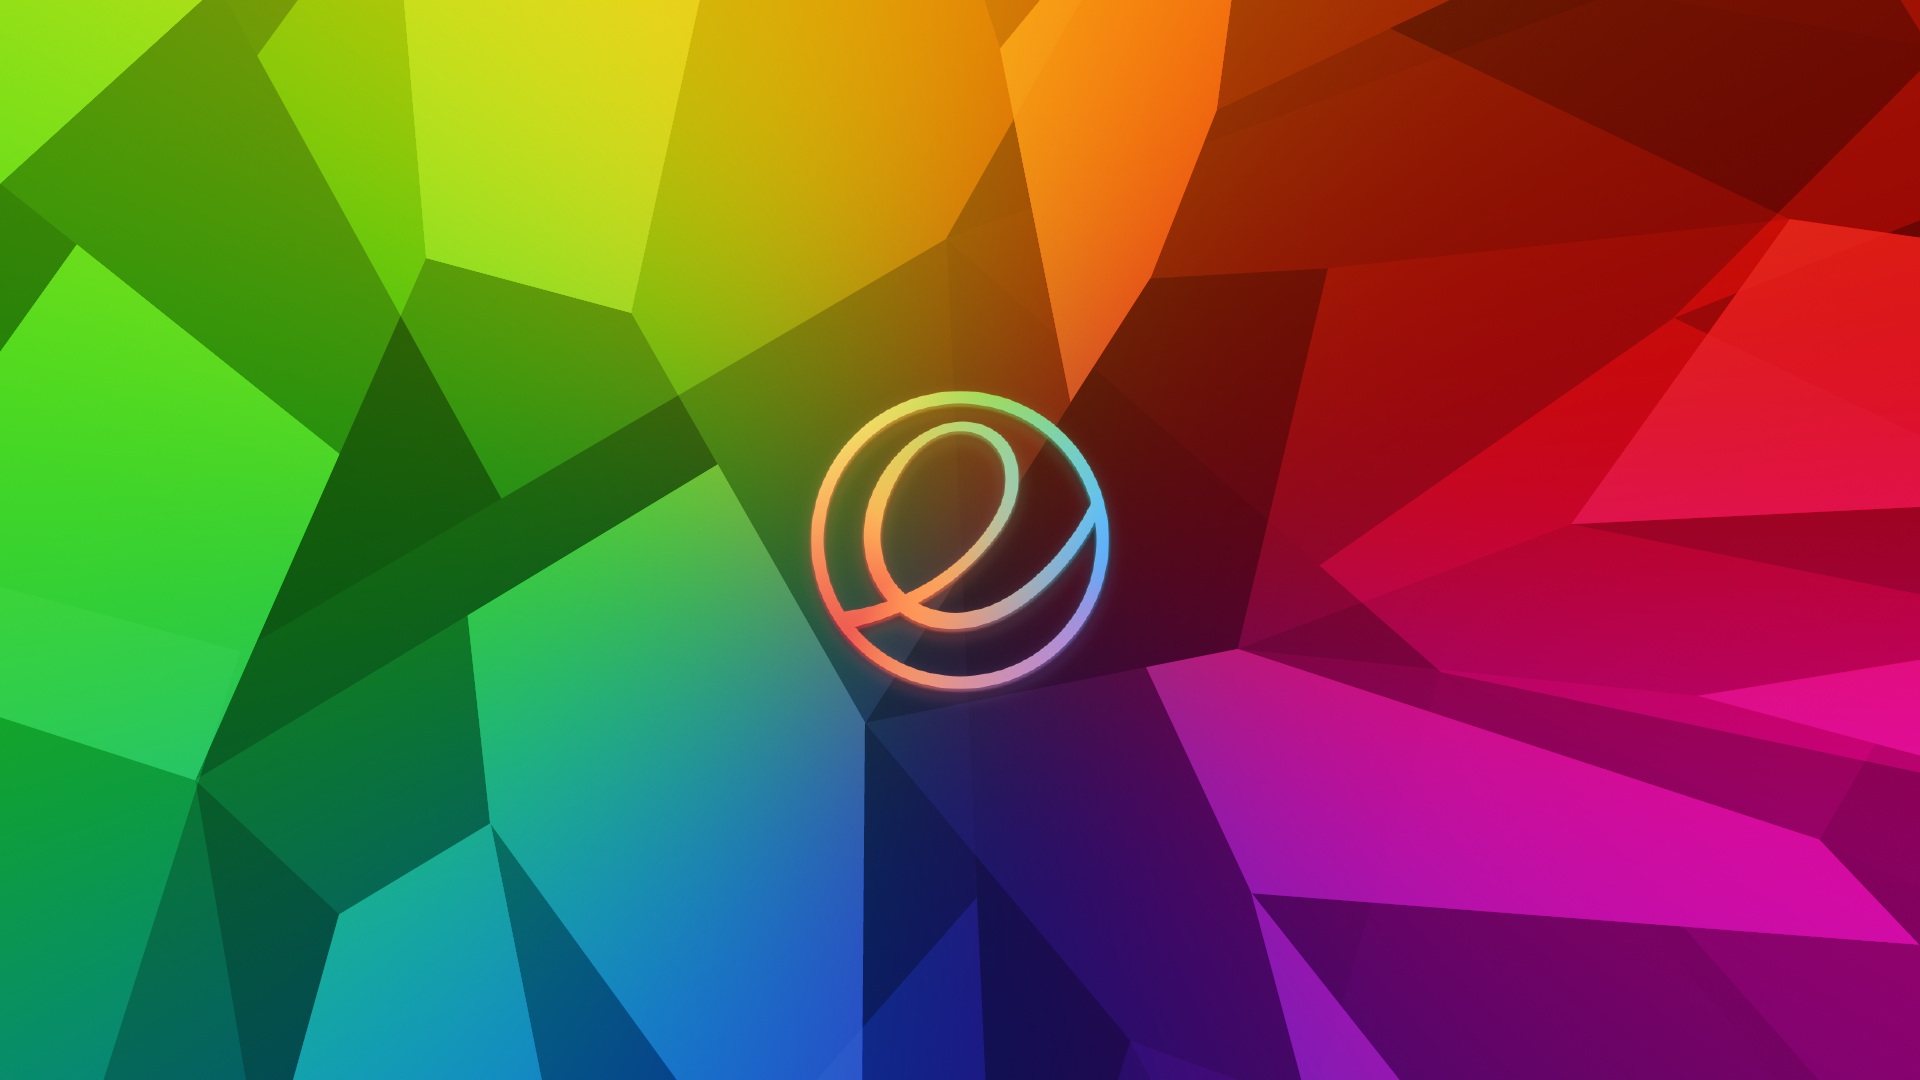 General 1920x1080 digital art geometry abstract colorful elementary OS Linux operating system logo RGB